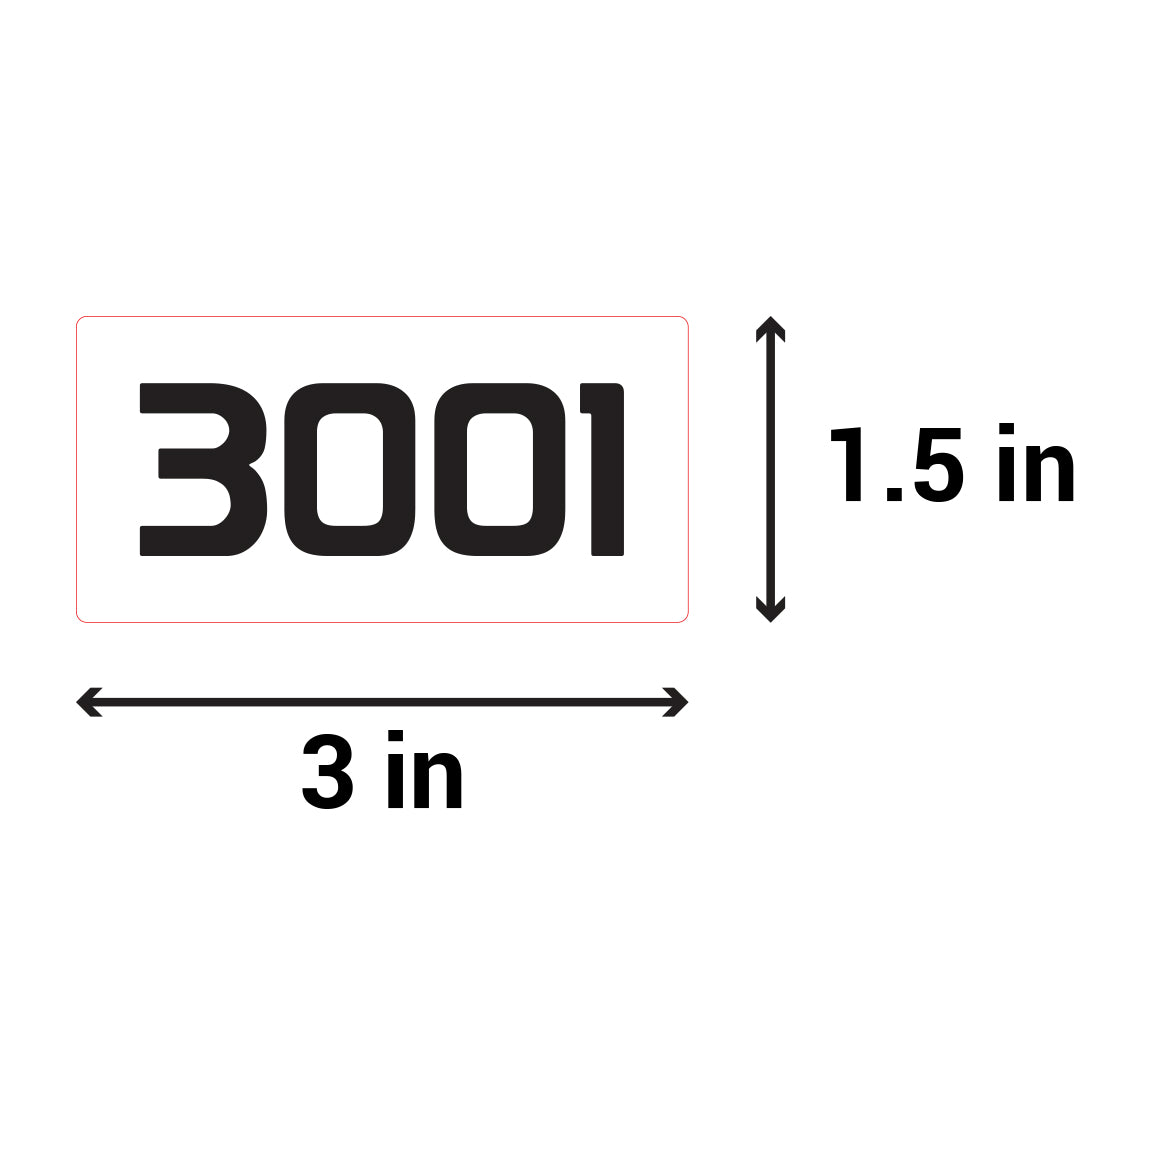 3 x 1.5 inch | Inventory: Consecutive Numbers "3001 to 4000" Stickers